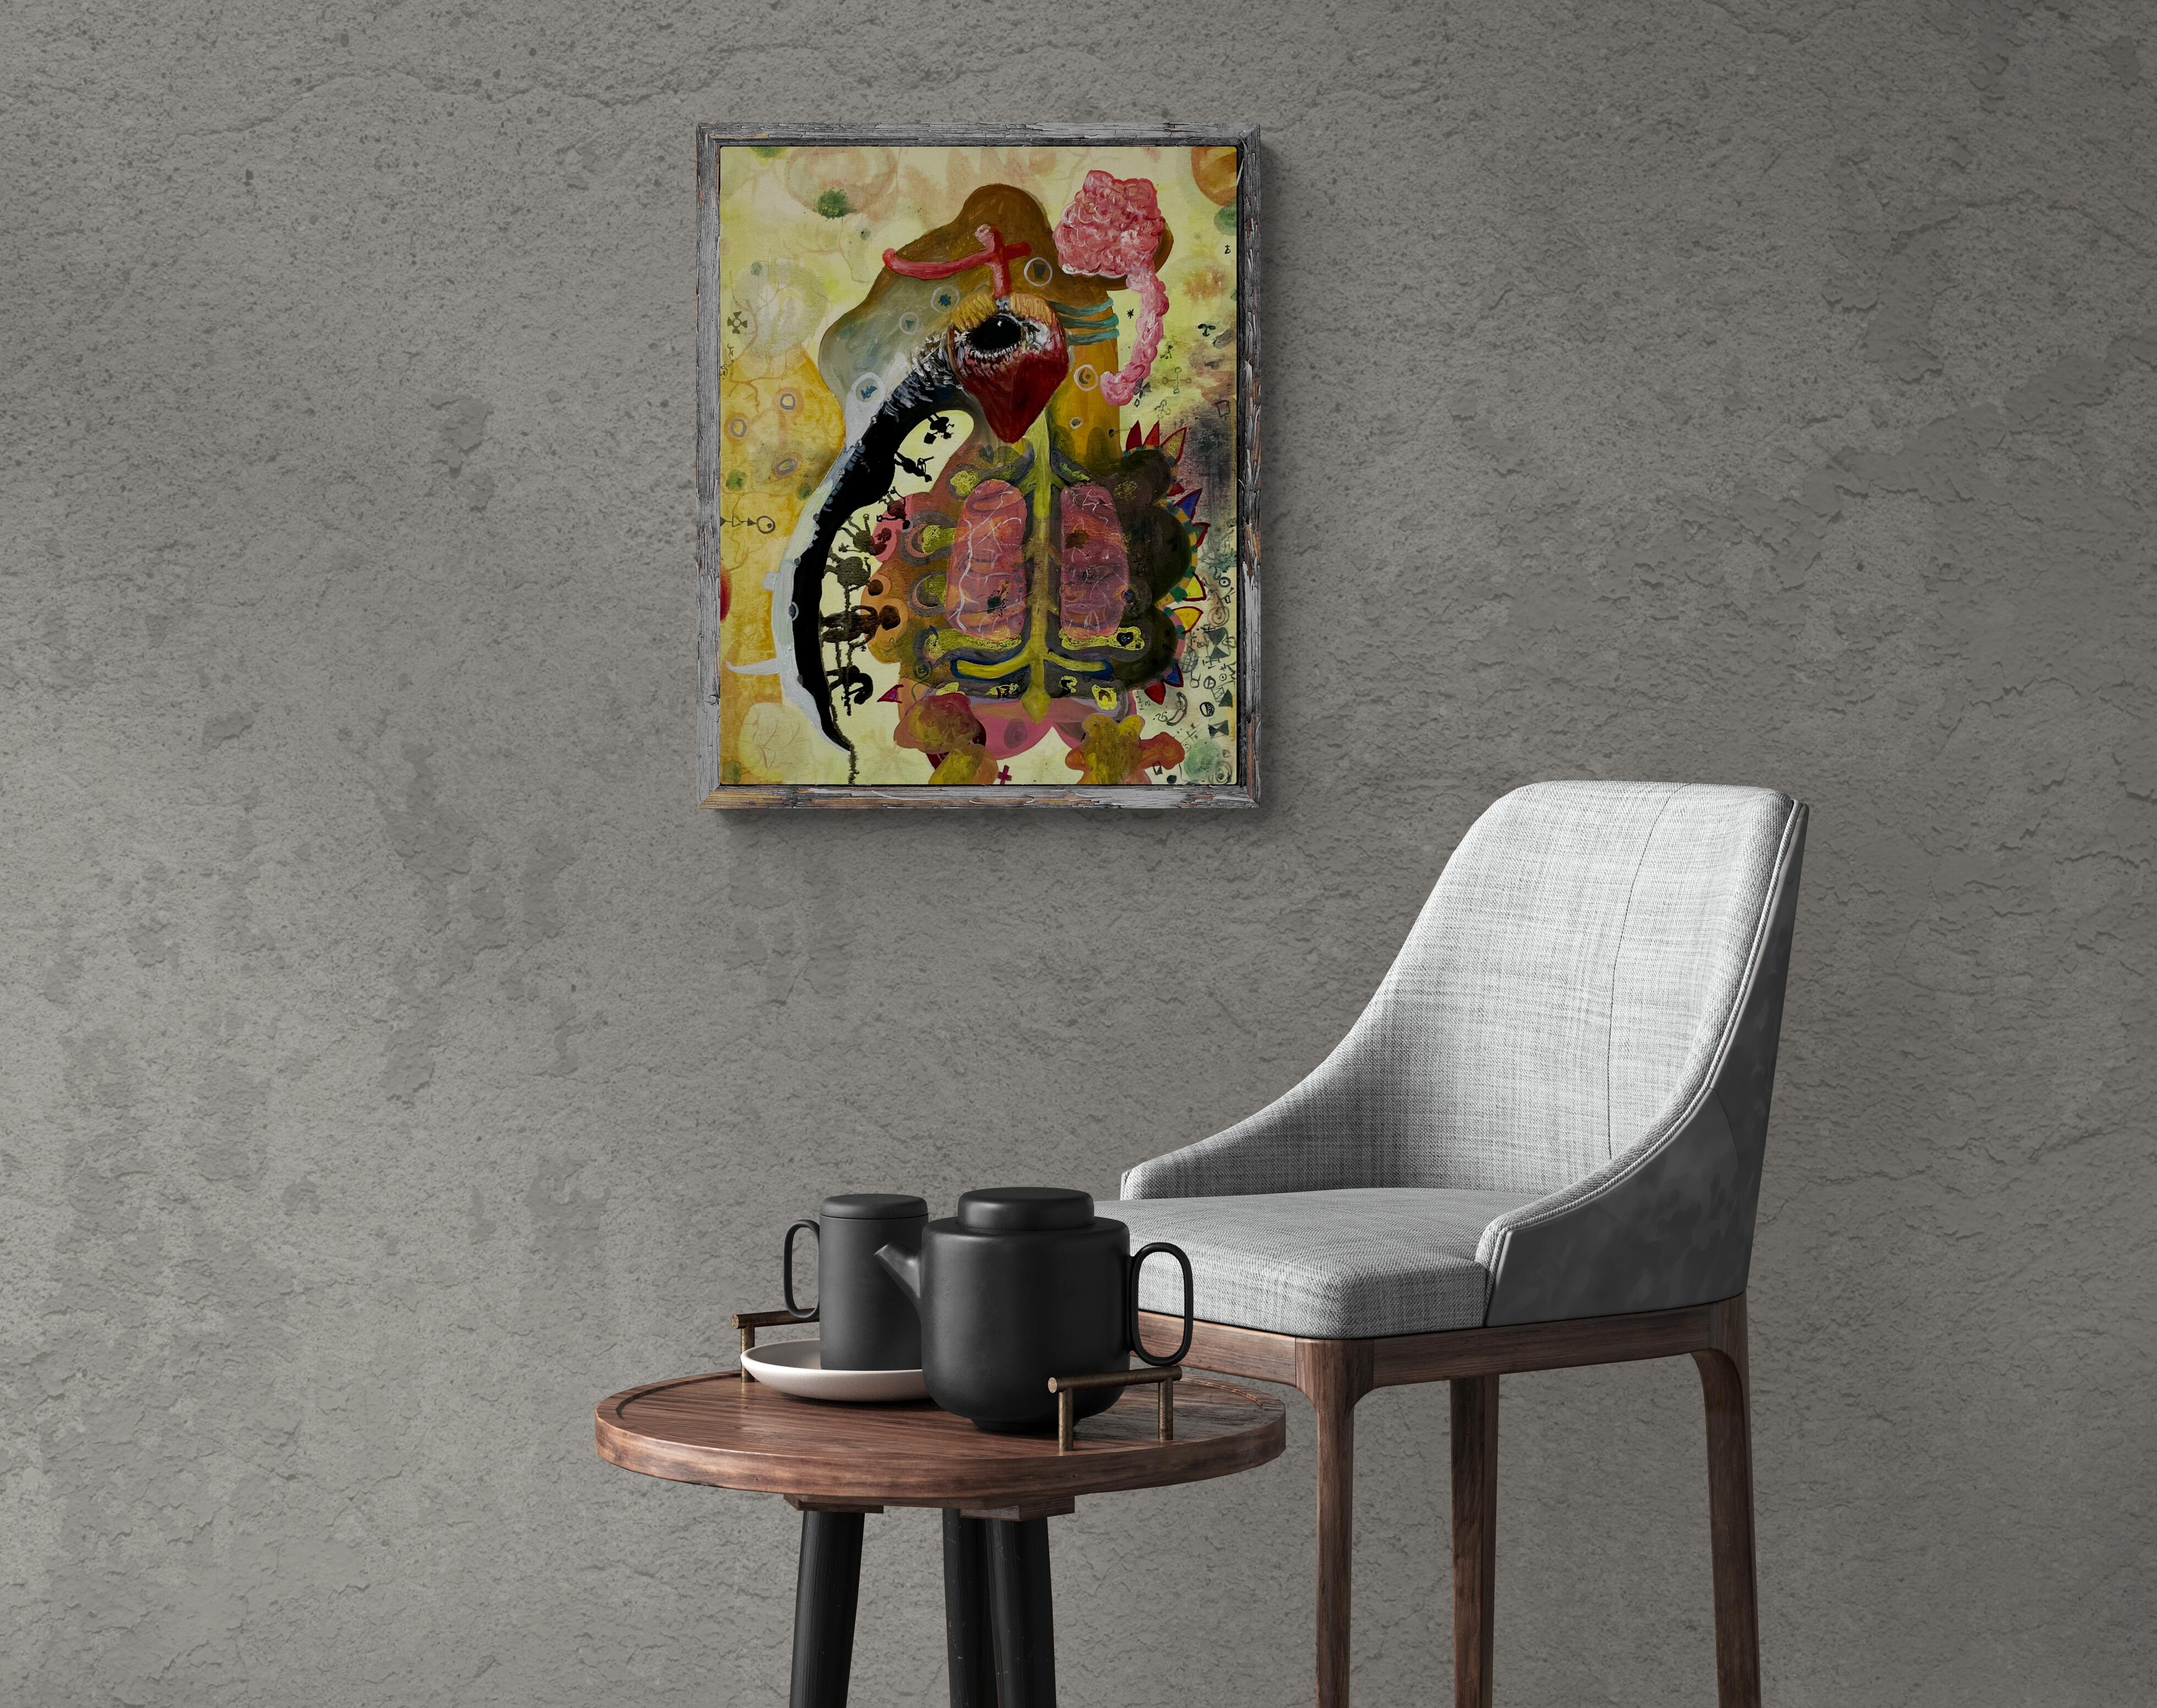 Joseph Broghammer 
The Long Stay (Hummingbird, Portrait, Storytelling, Oil Painting)
Oil on Canvas
Year: 2023
Size: 21x17in
Signed by hand
COA provided
Ref.: 924802-1895

*on stretcher frame - ready to hang
** custom framing options available -